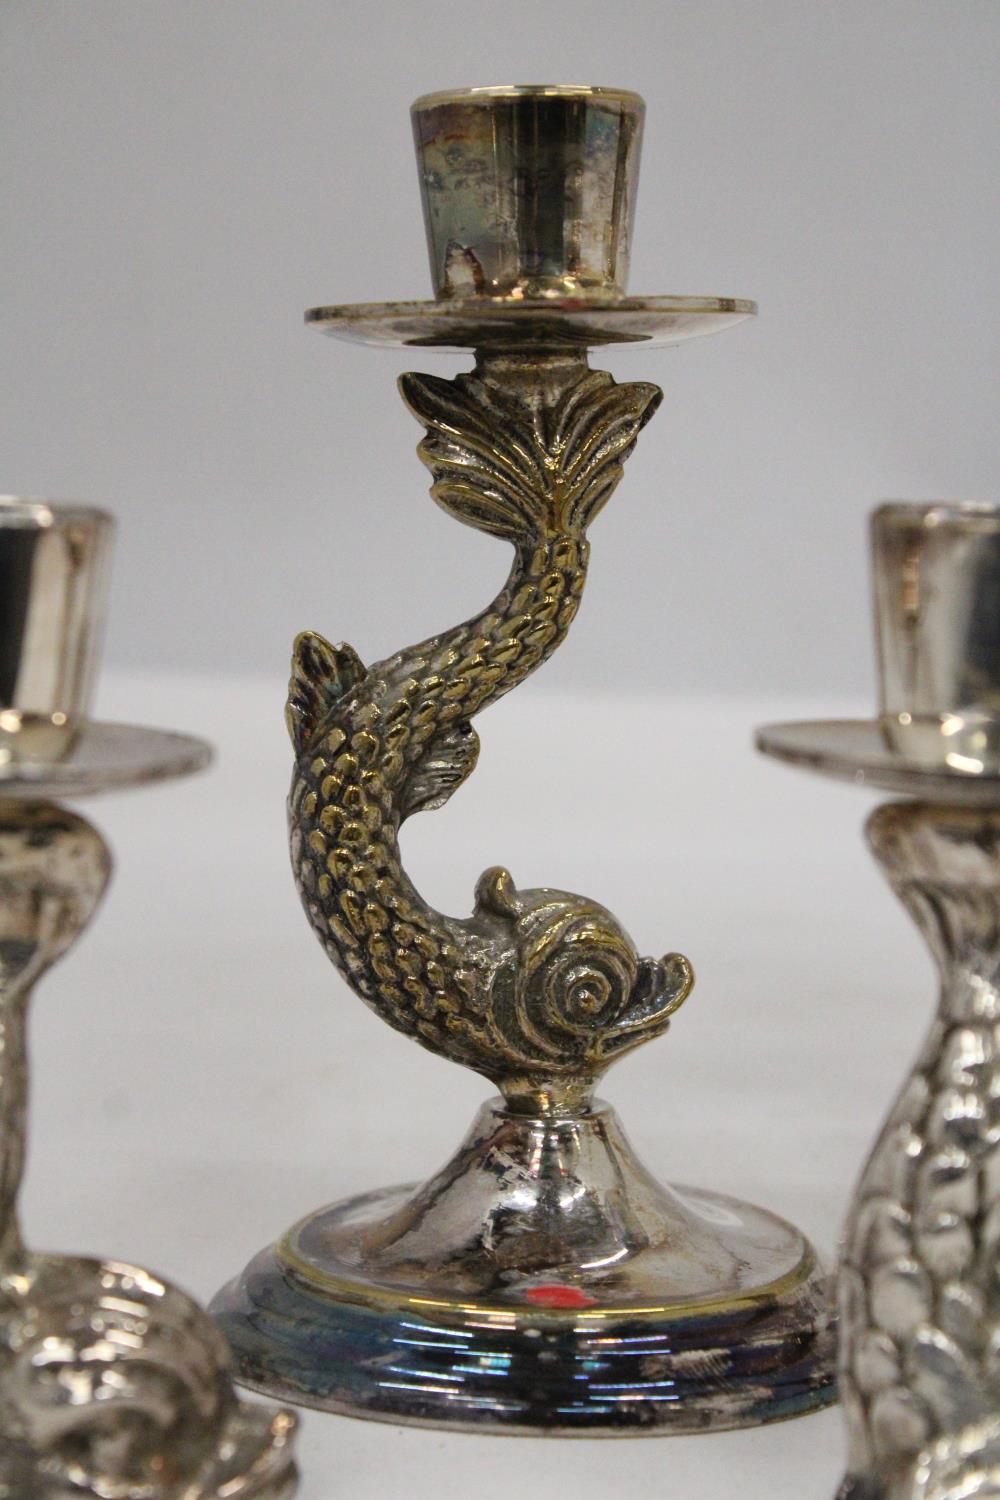 TWO VINTAGE ORNATE SILVER PLATED KOI CARP CANDLE HOLDERS PLUS THREE FURTHER KOI FISH CANDLE STICKS - Image 3 of 7